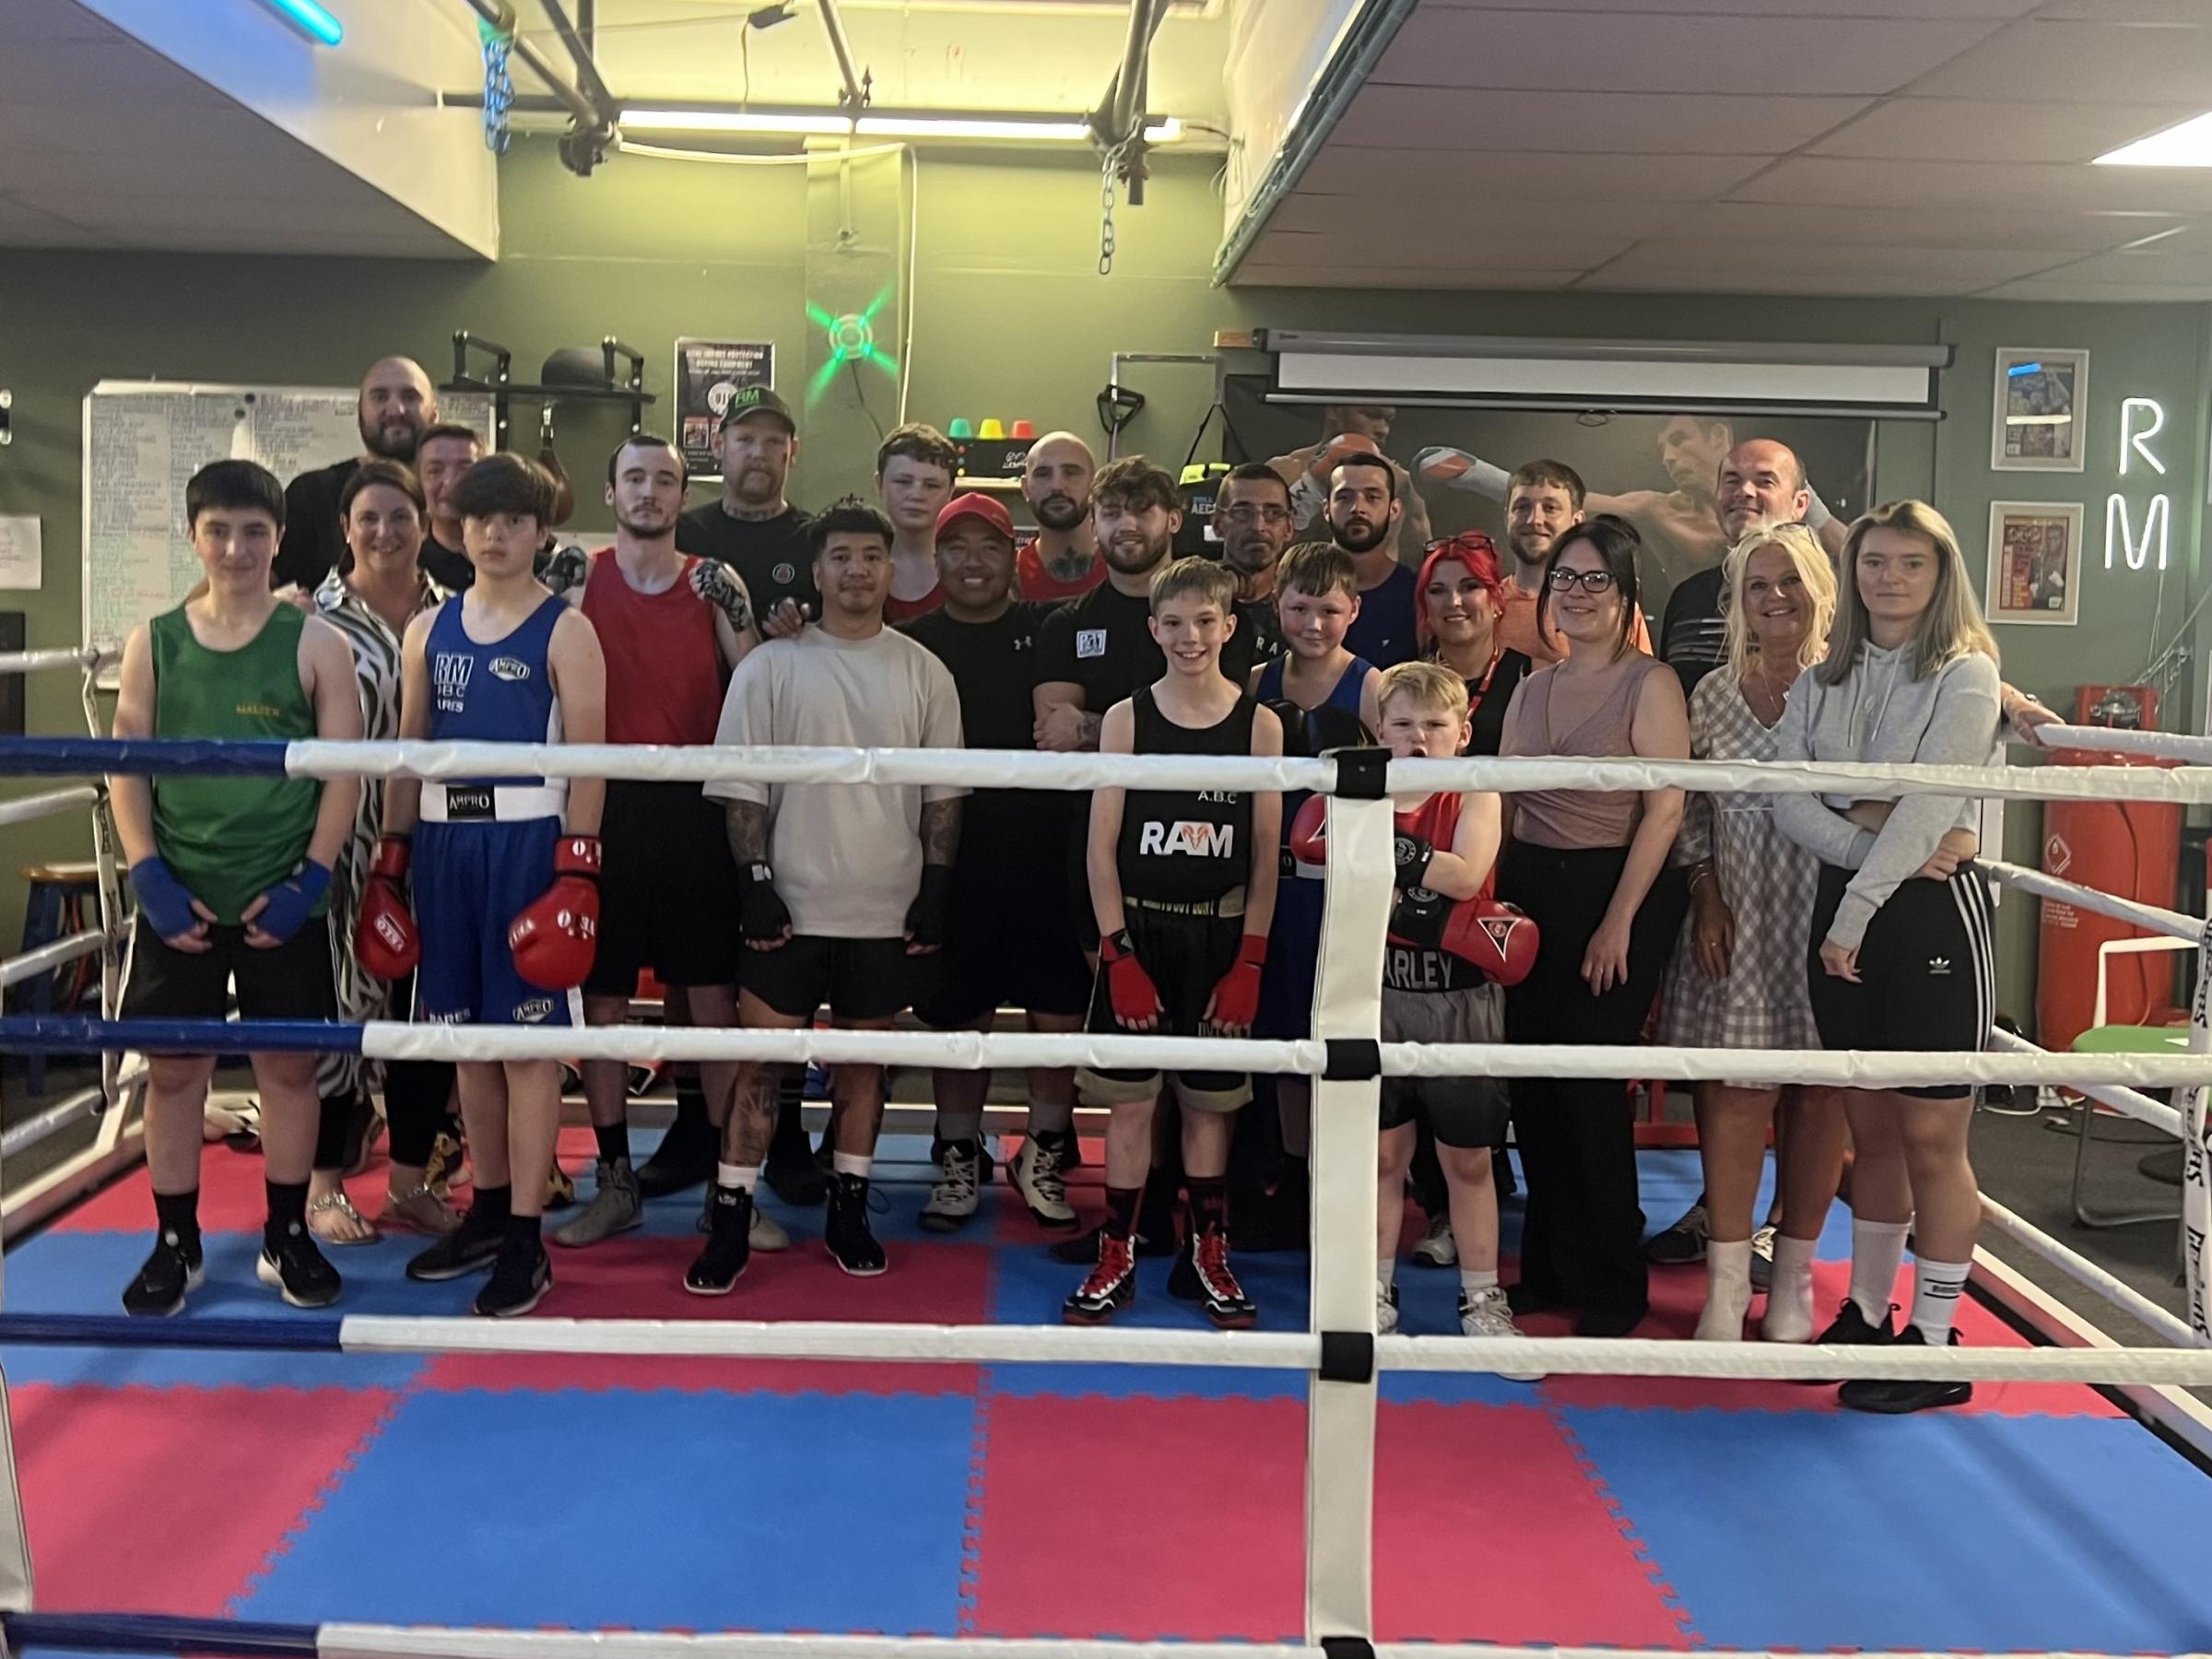 Daniel with some of the members of the gym and boxing club